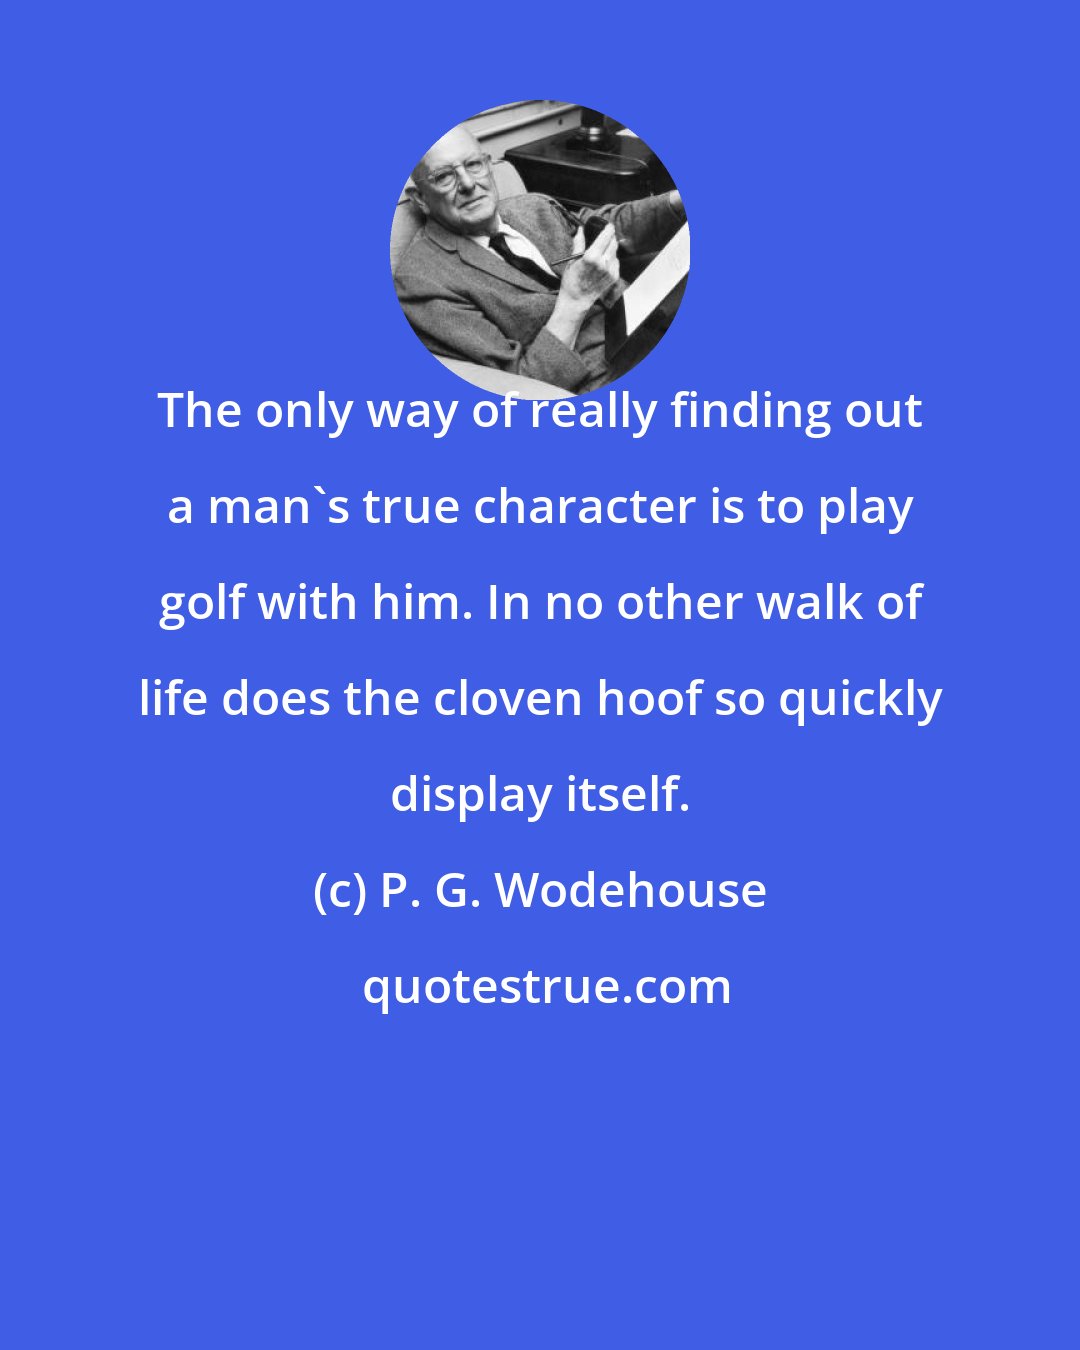 P. G. Wodehouse: The only way of really finding out a man's true character is to play golf with him. In no other walk of life does the cloven hoof so quickly display itself.